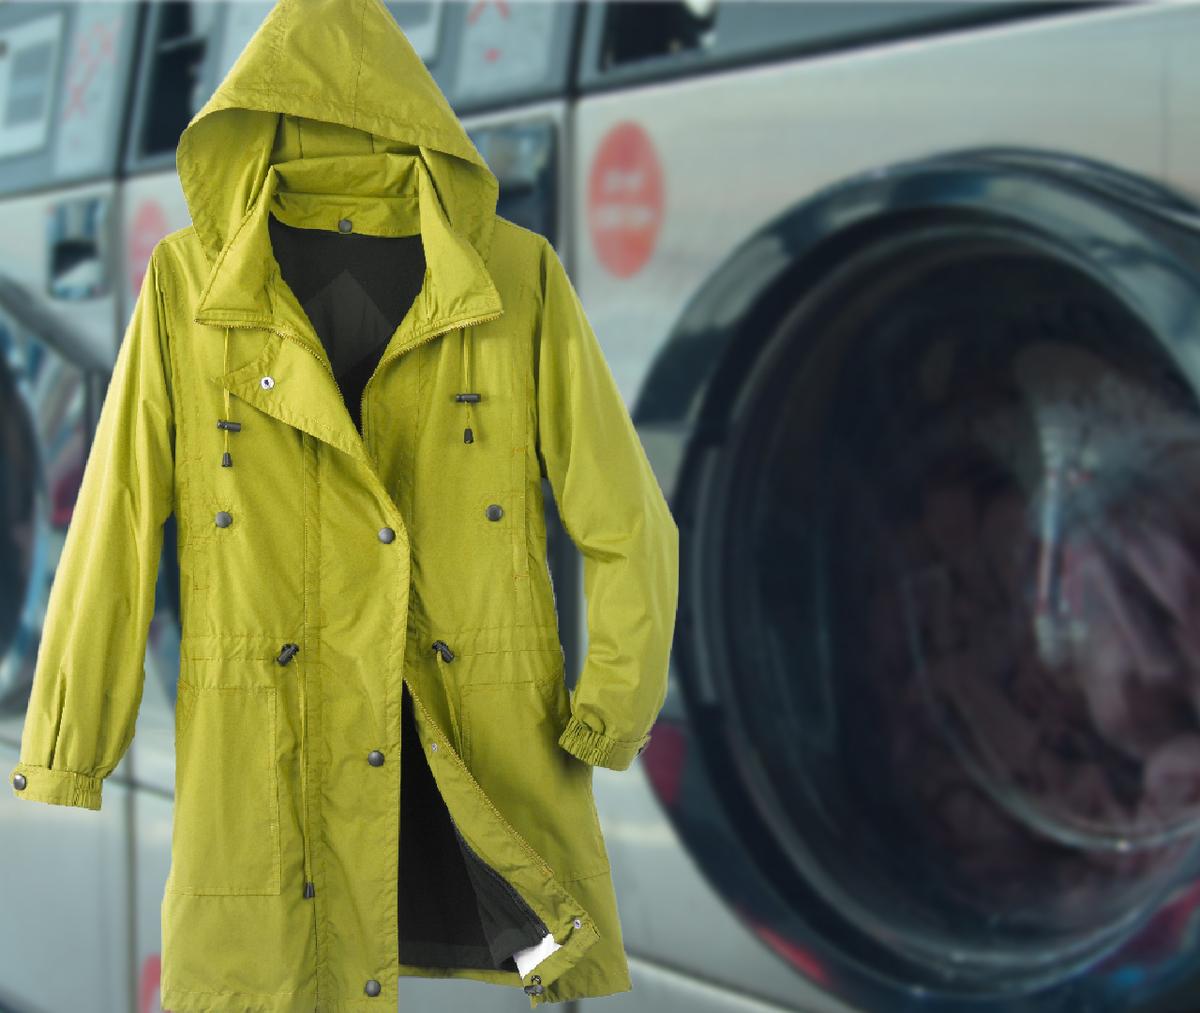 Raincoat dry cleaning